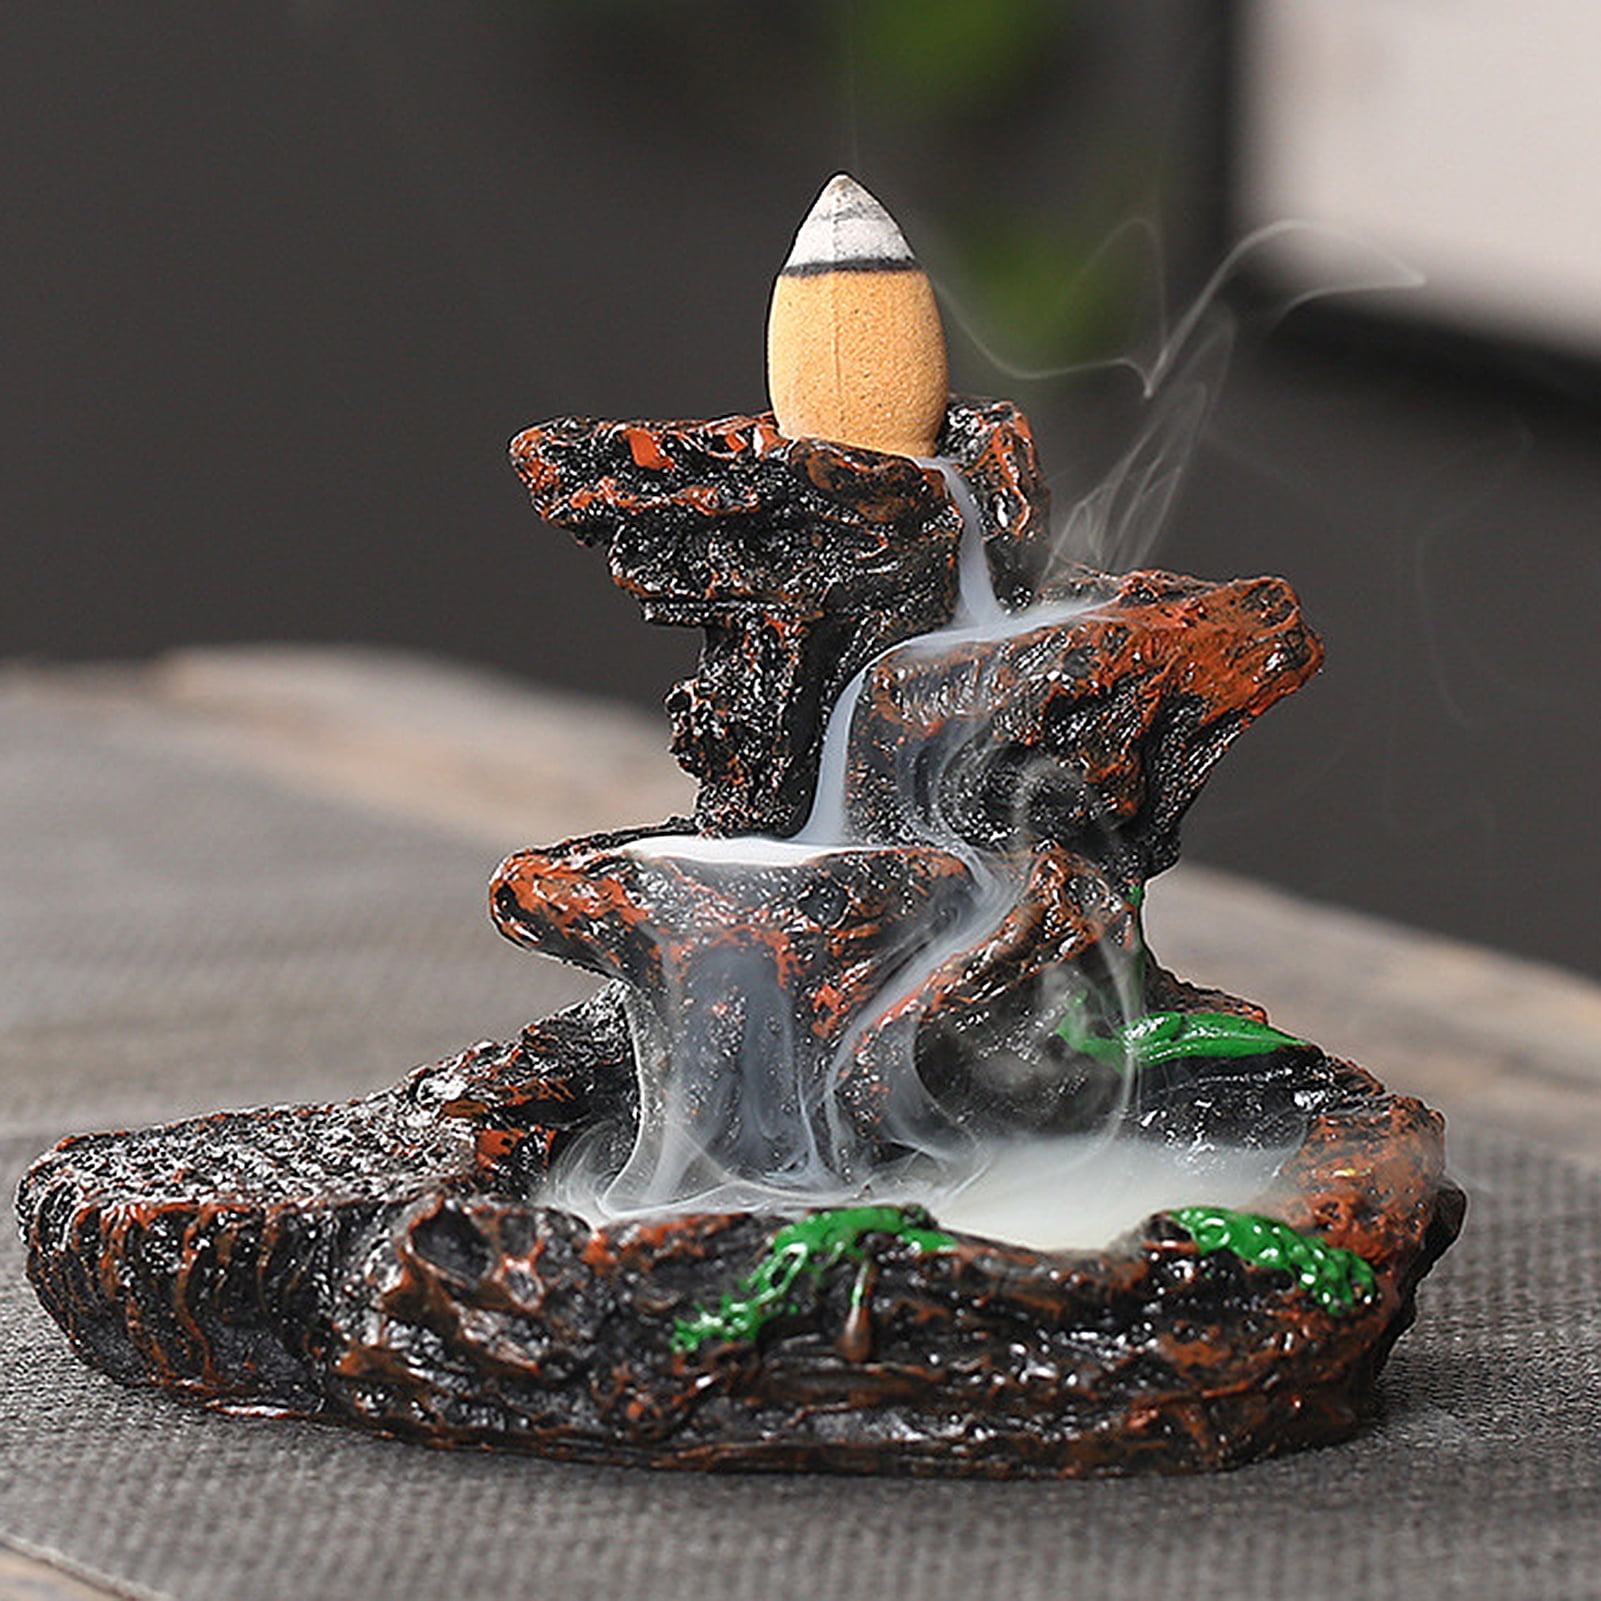 Details about   Backflow Incense Cones Burner Holder for Home Office Decorated Ash Catcher Gift 